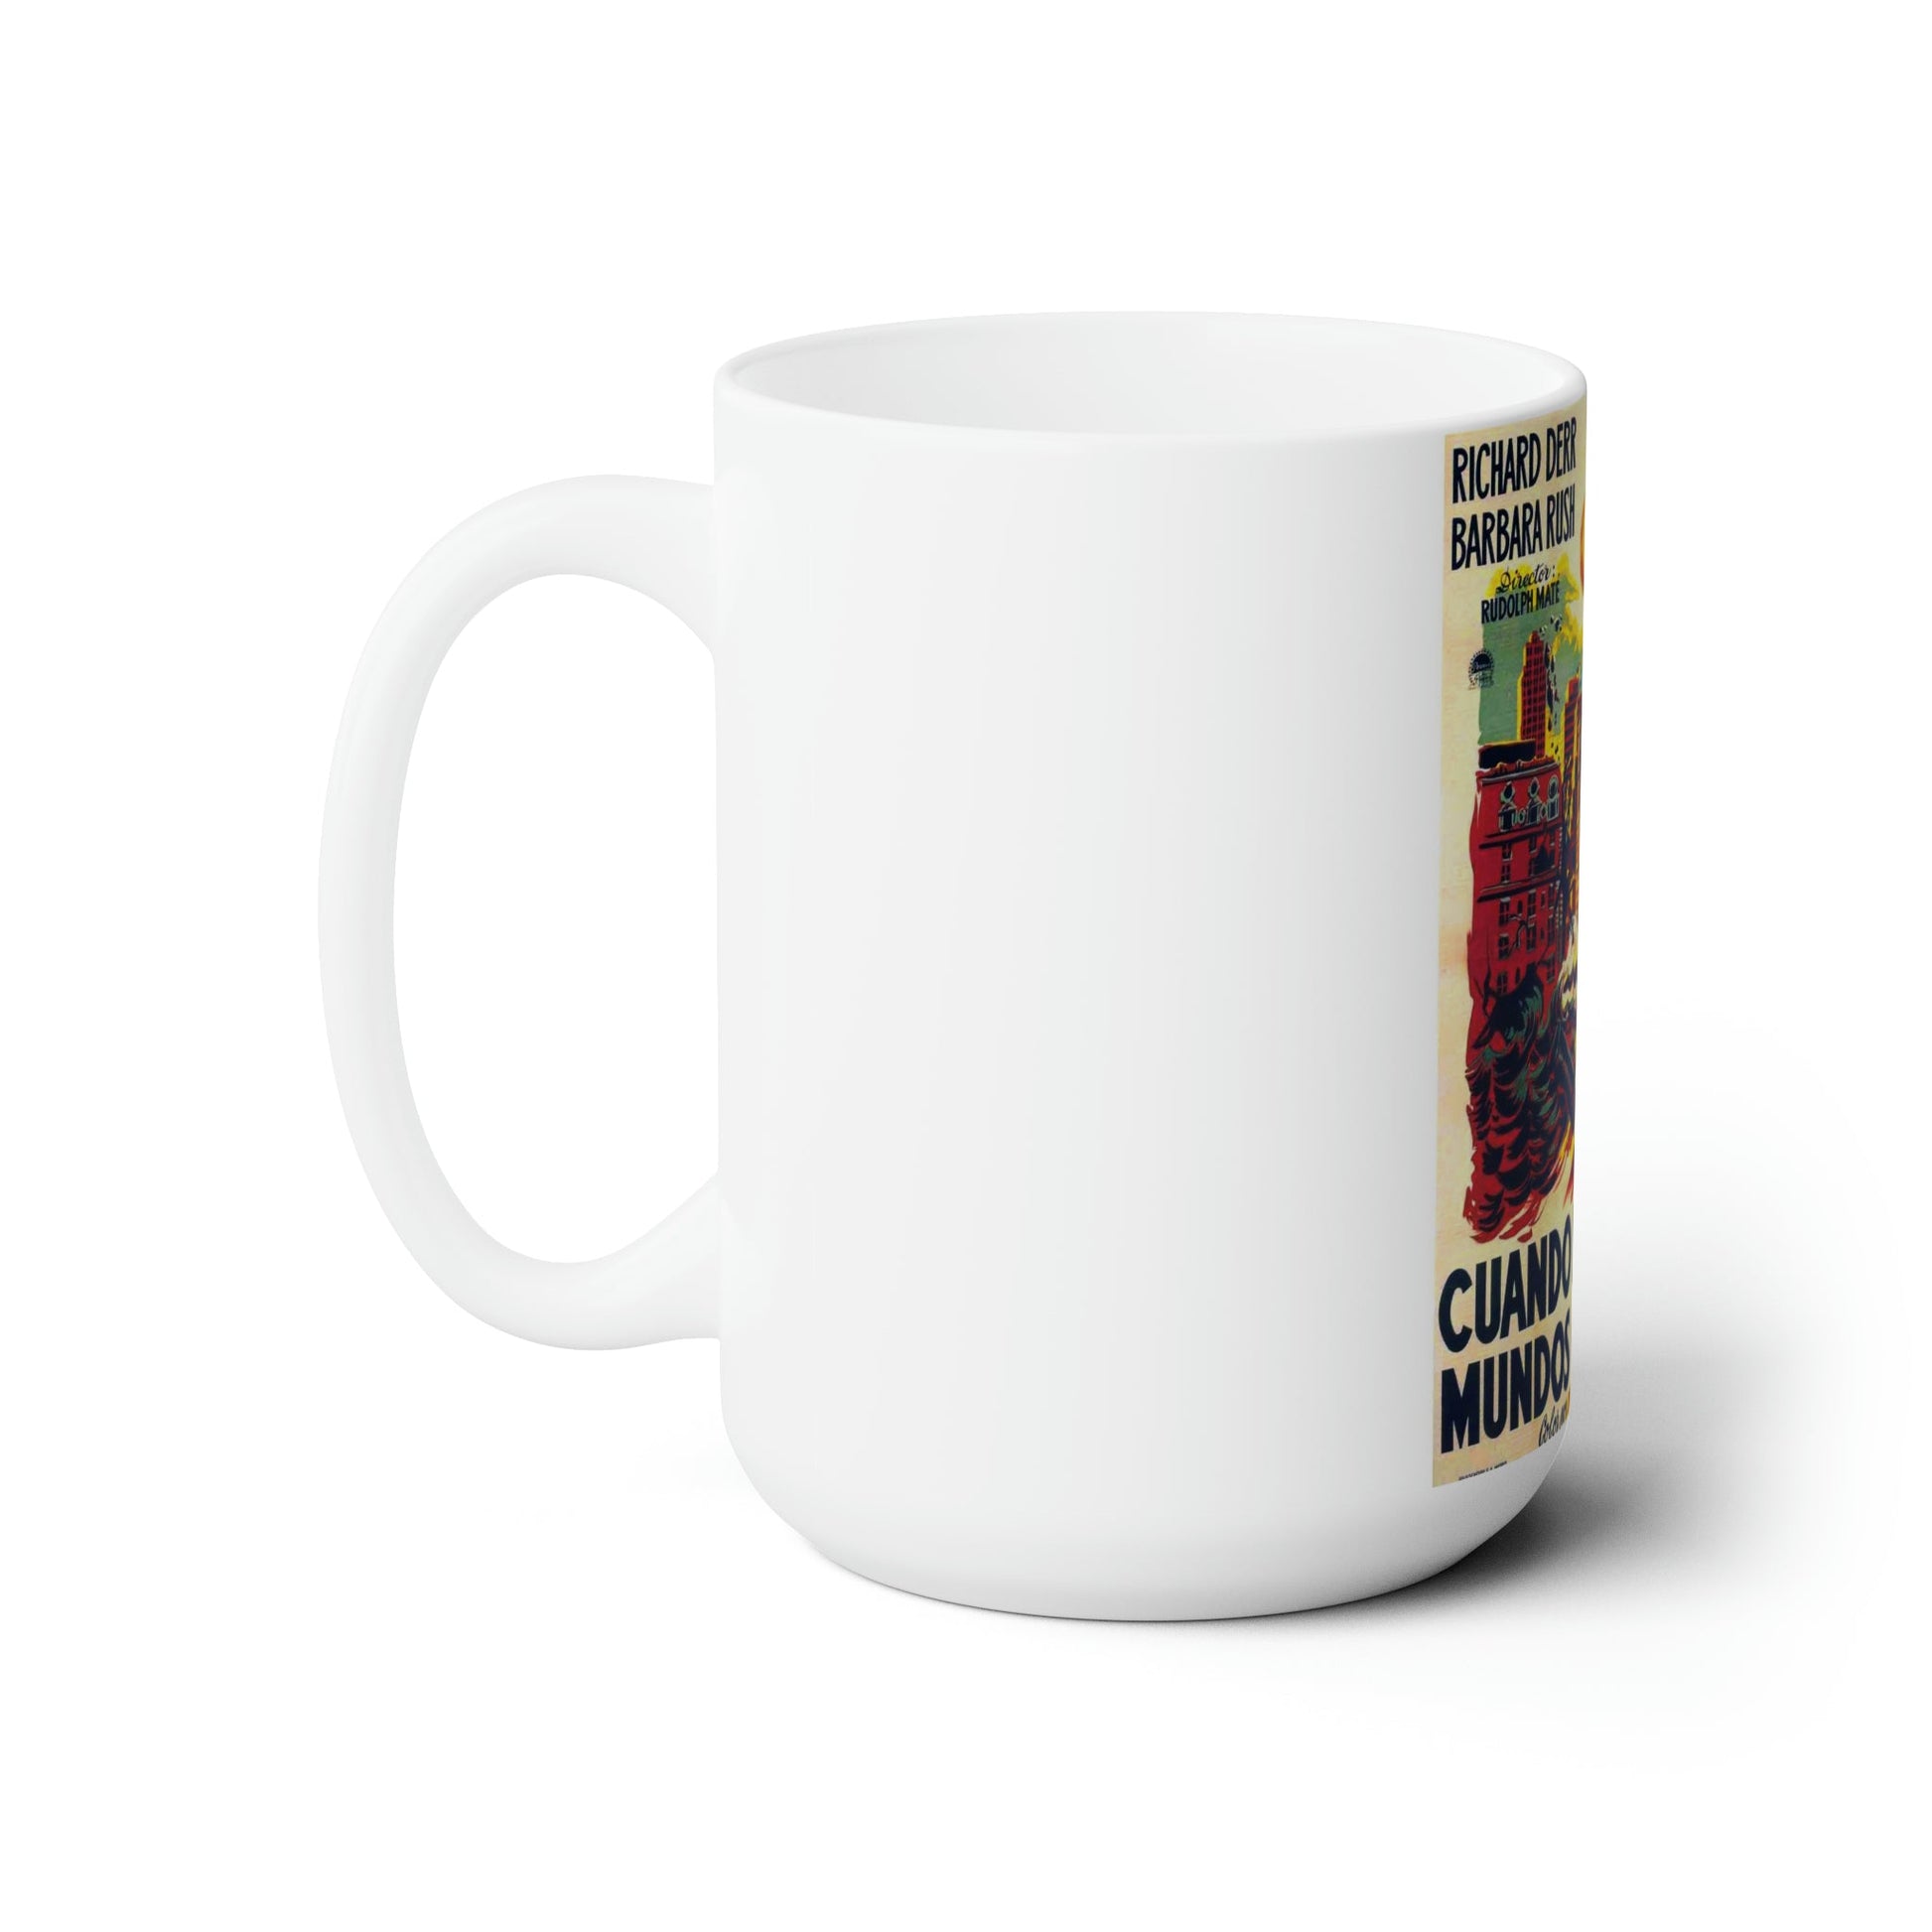 WHEN WORLDS COLLIDE (SPANISH 2) 1951 Movie Poster - White Coffee Cup 15oz-15oz-The Sticker Space